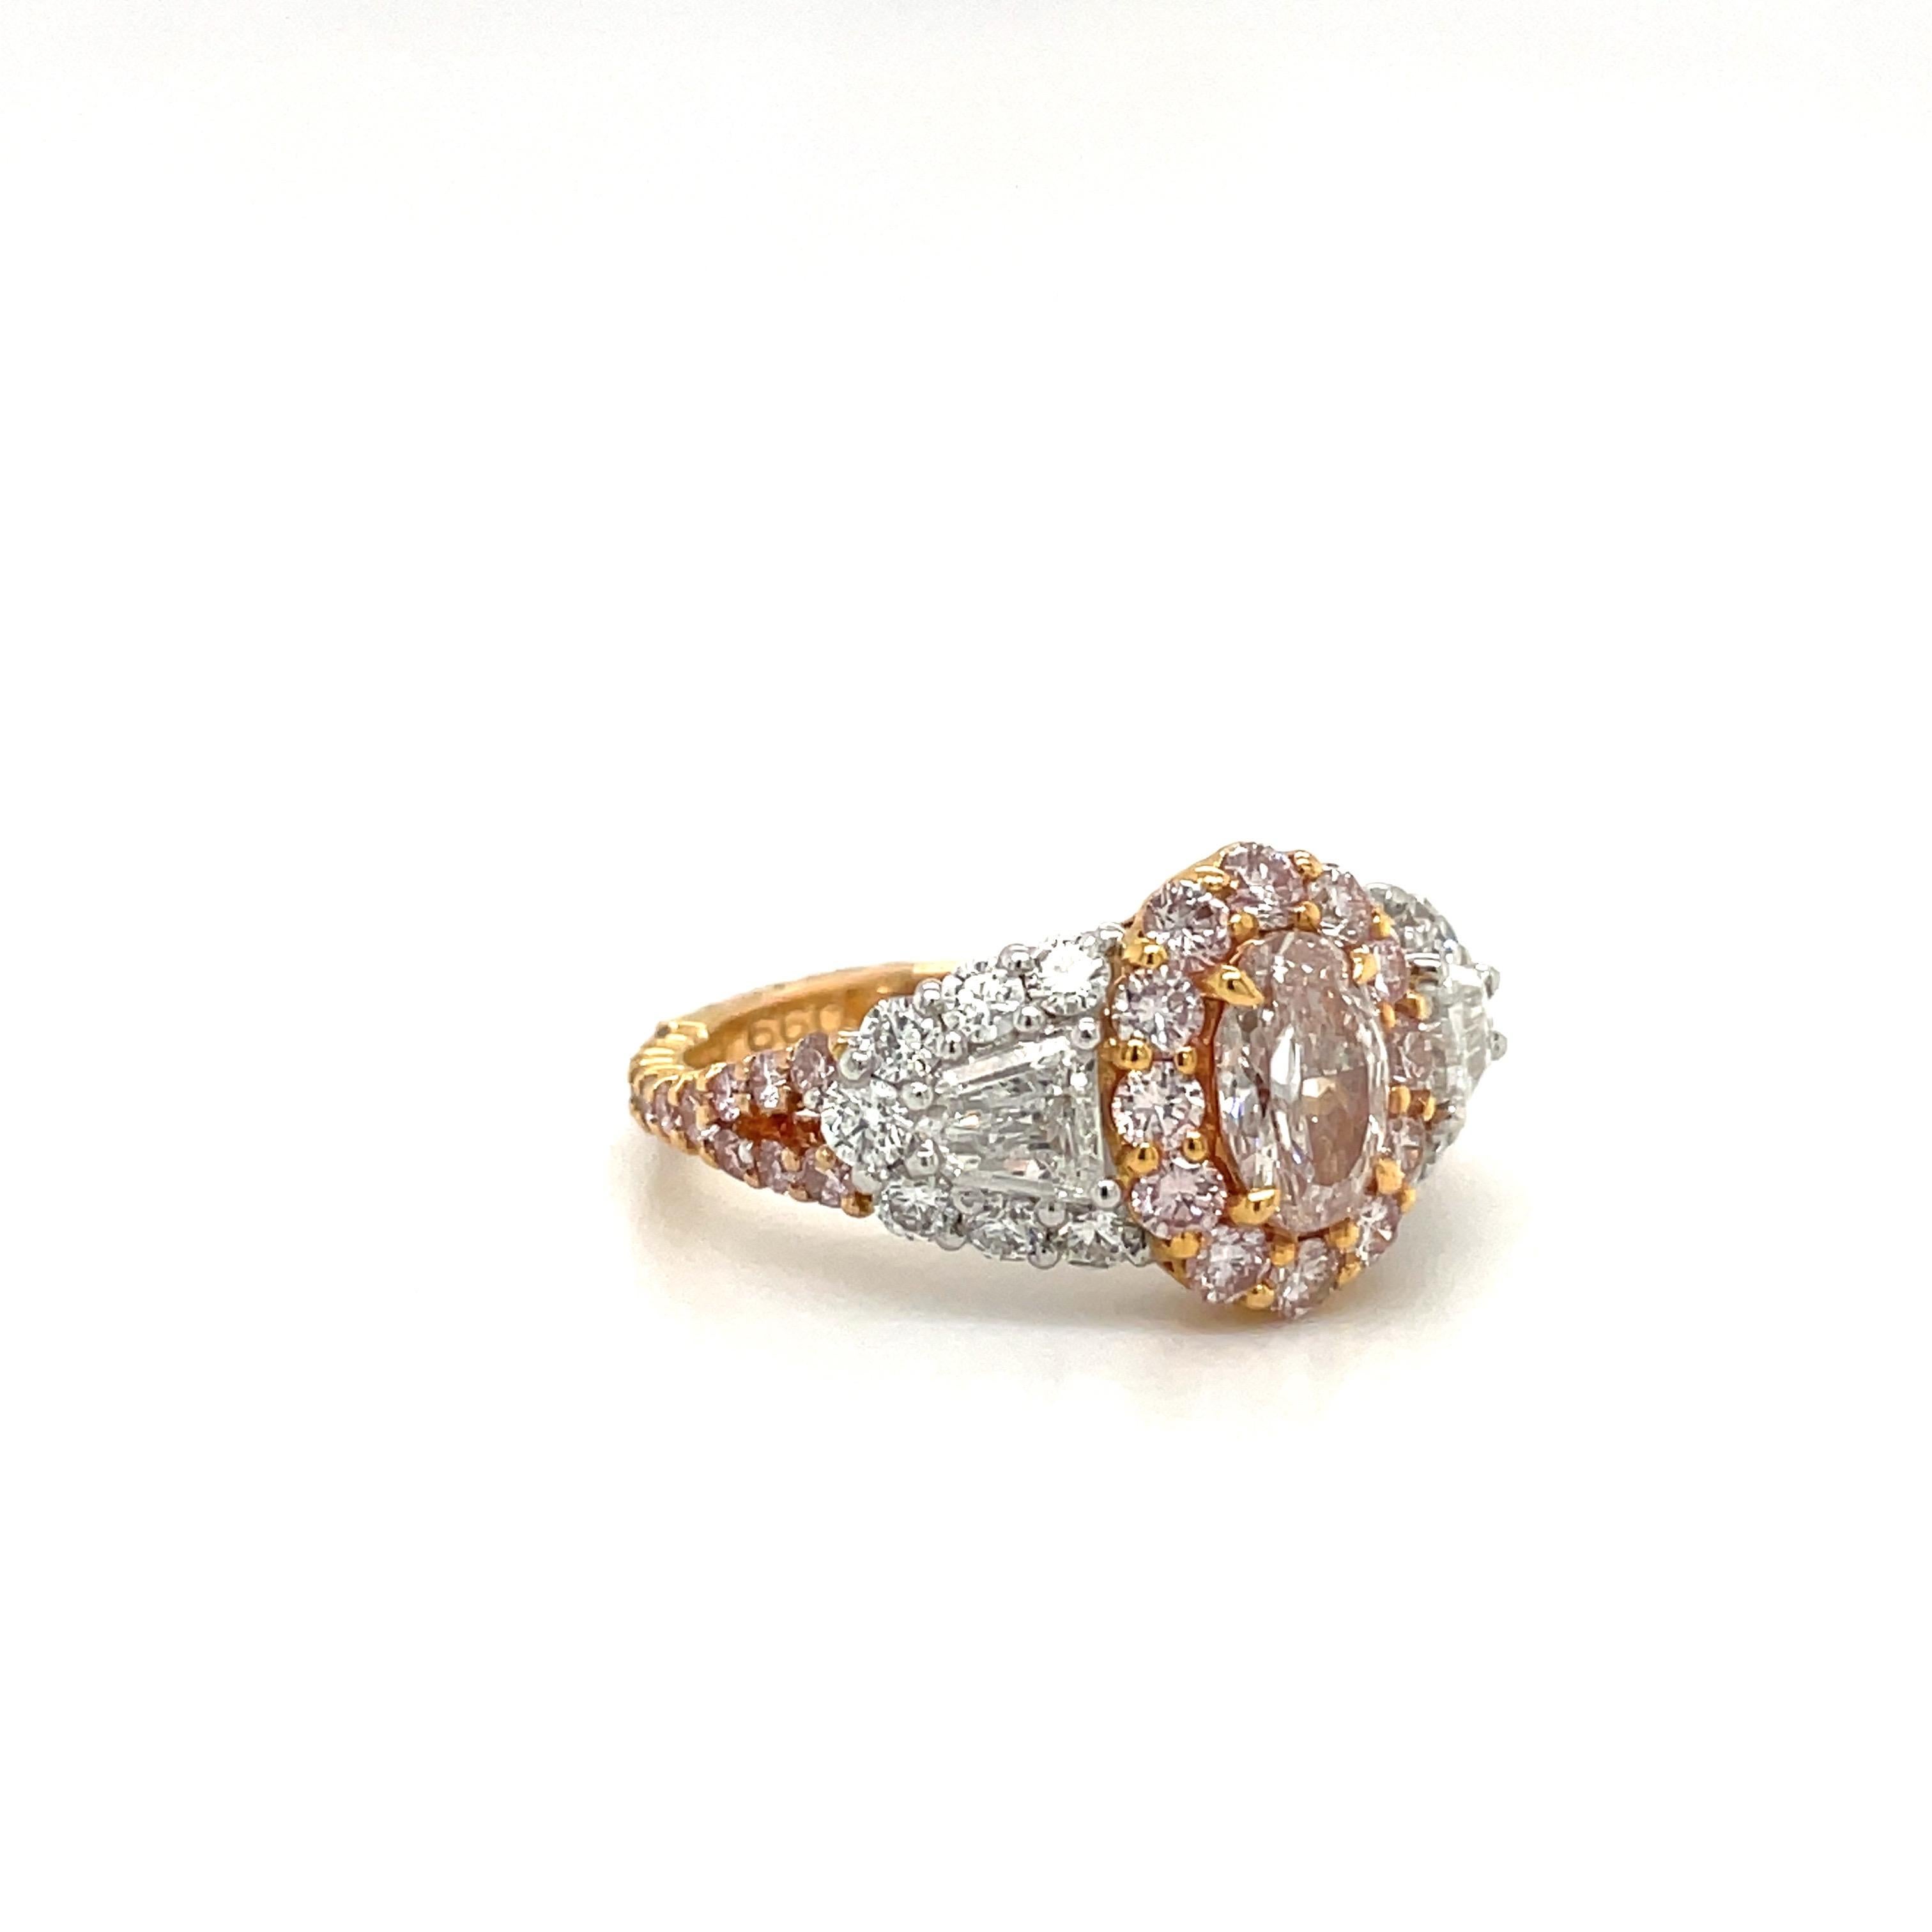 Fancy Light Pink Diamond Ring with White Diamonds Set in Rose Gold and Platinum For Sale 1